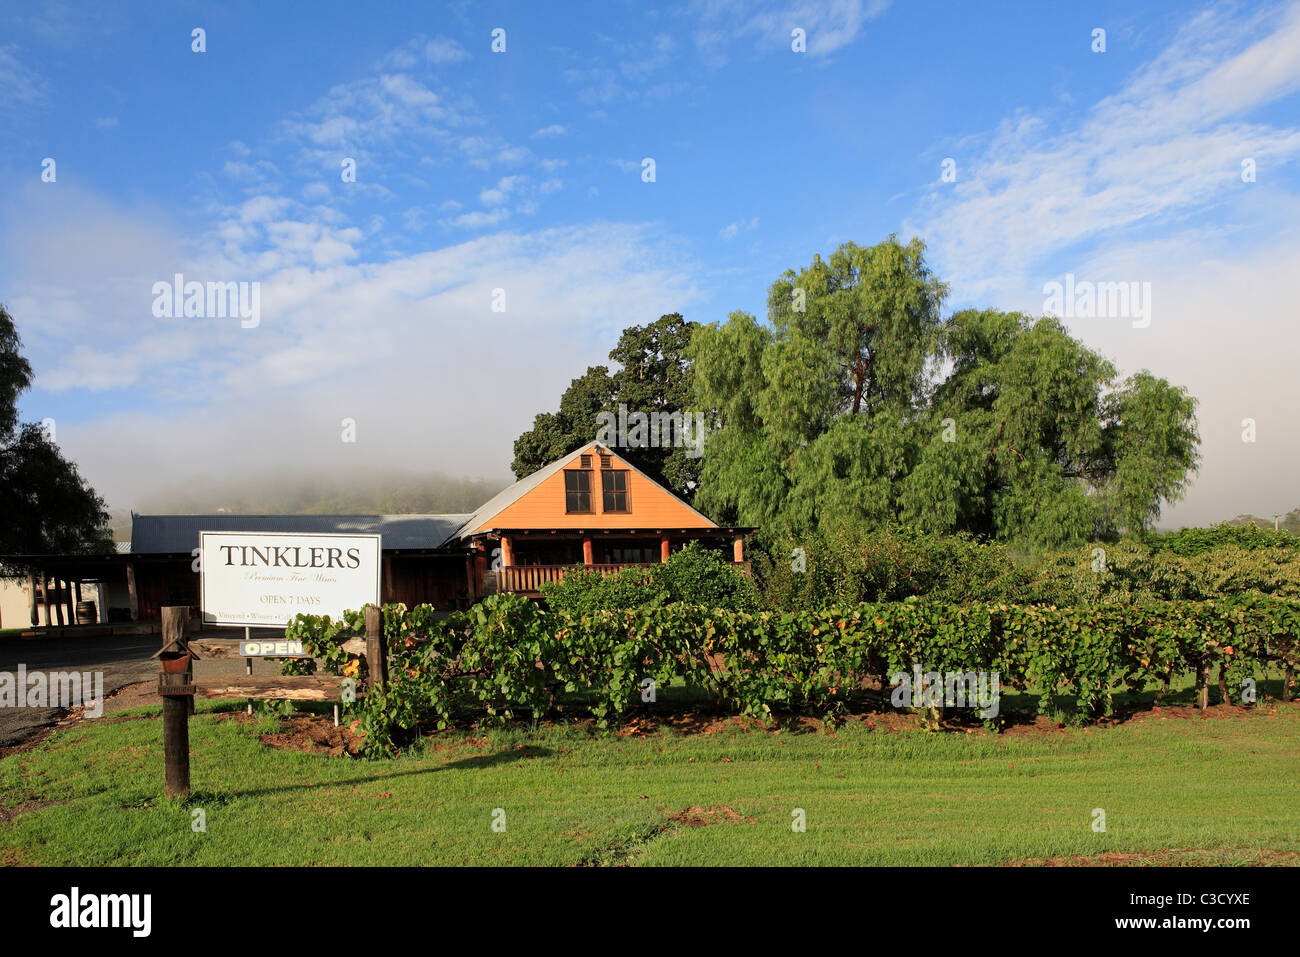 Entrance sign to cellar door and vineyard.Tinklers Wines, Pokolbin, Hunter Valley, New South Wales, Australia. Stock Photo